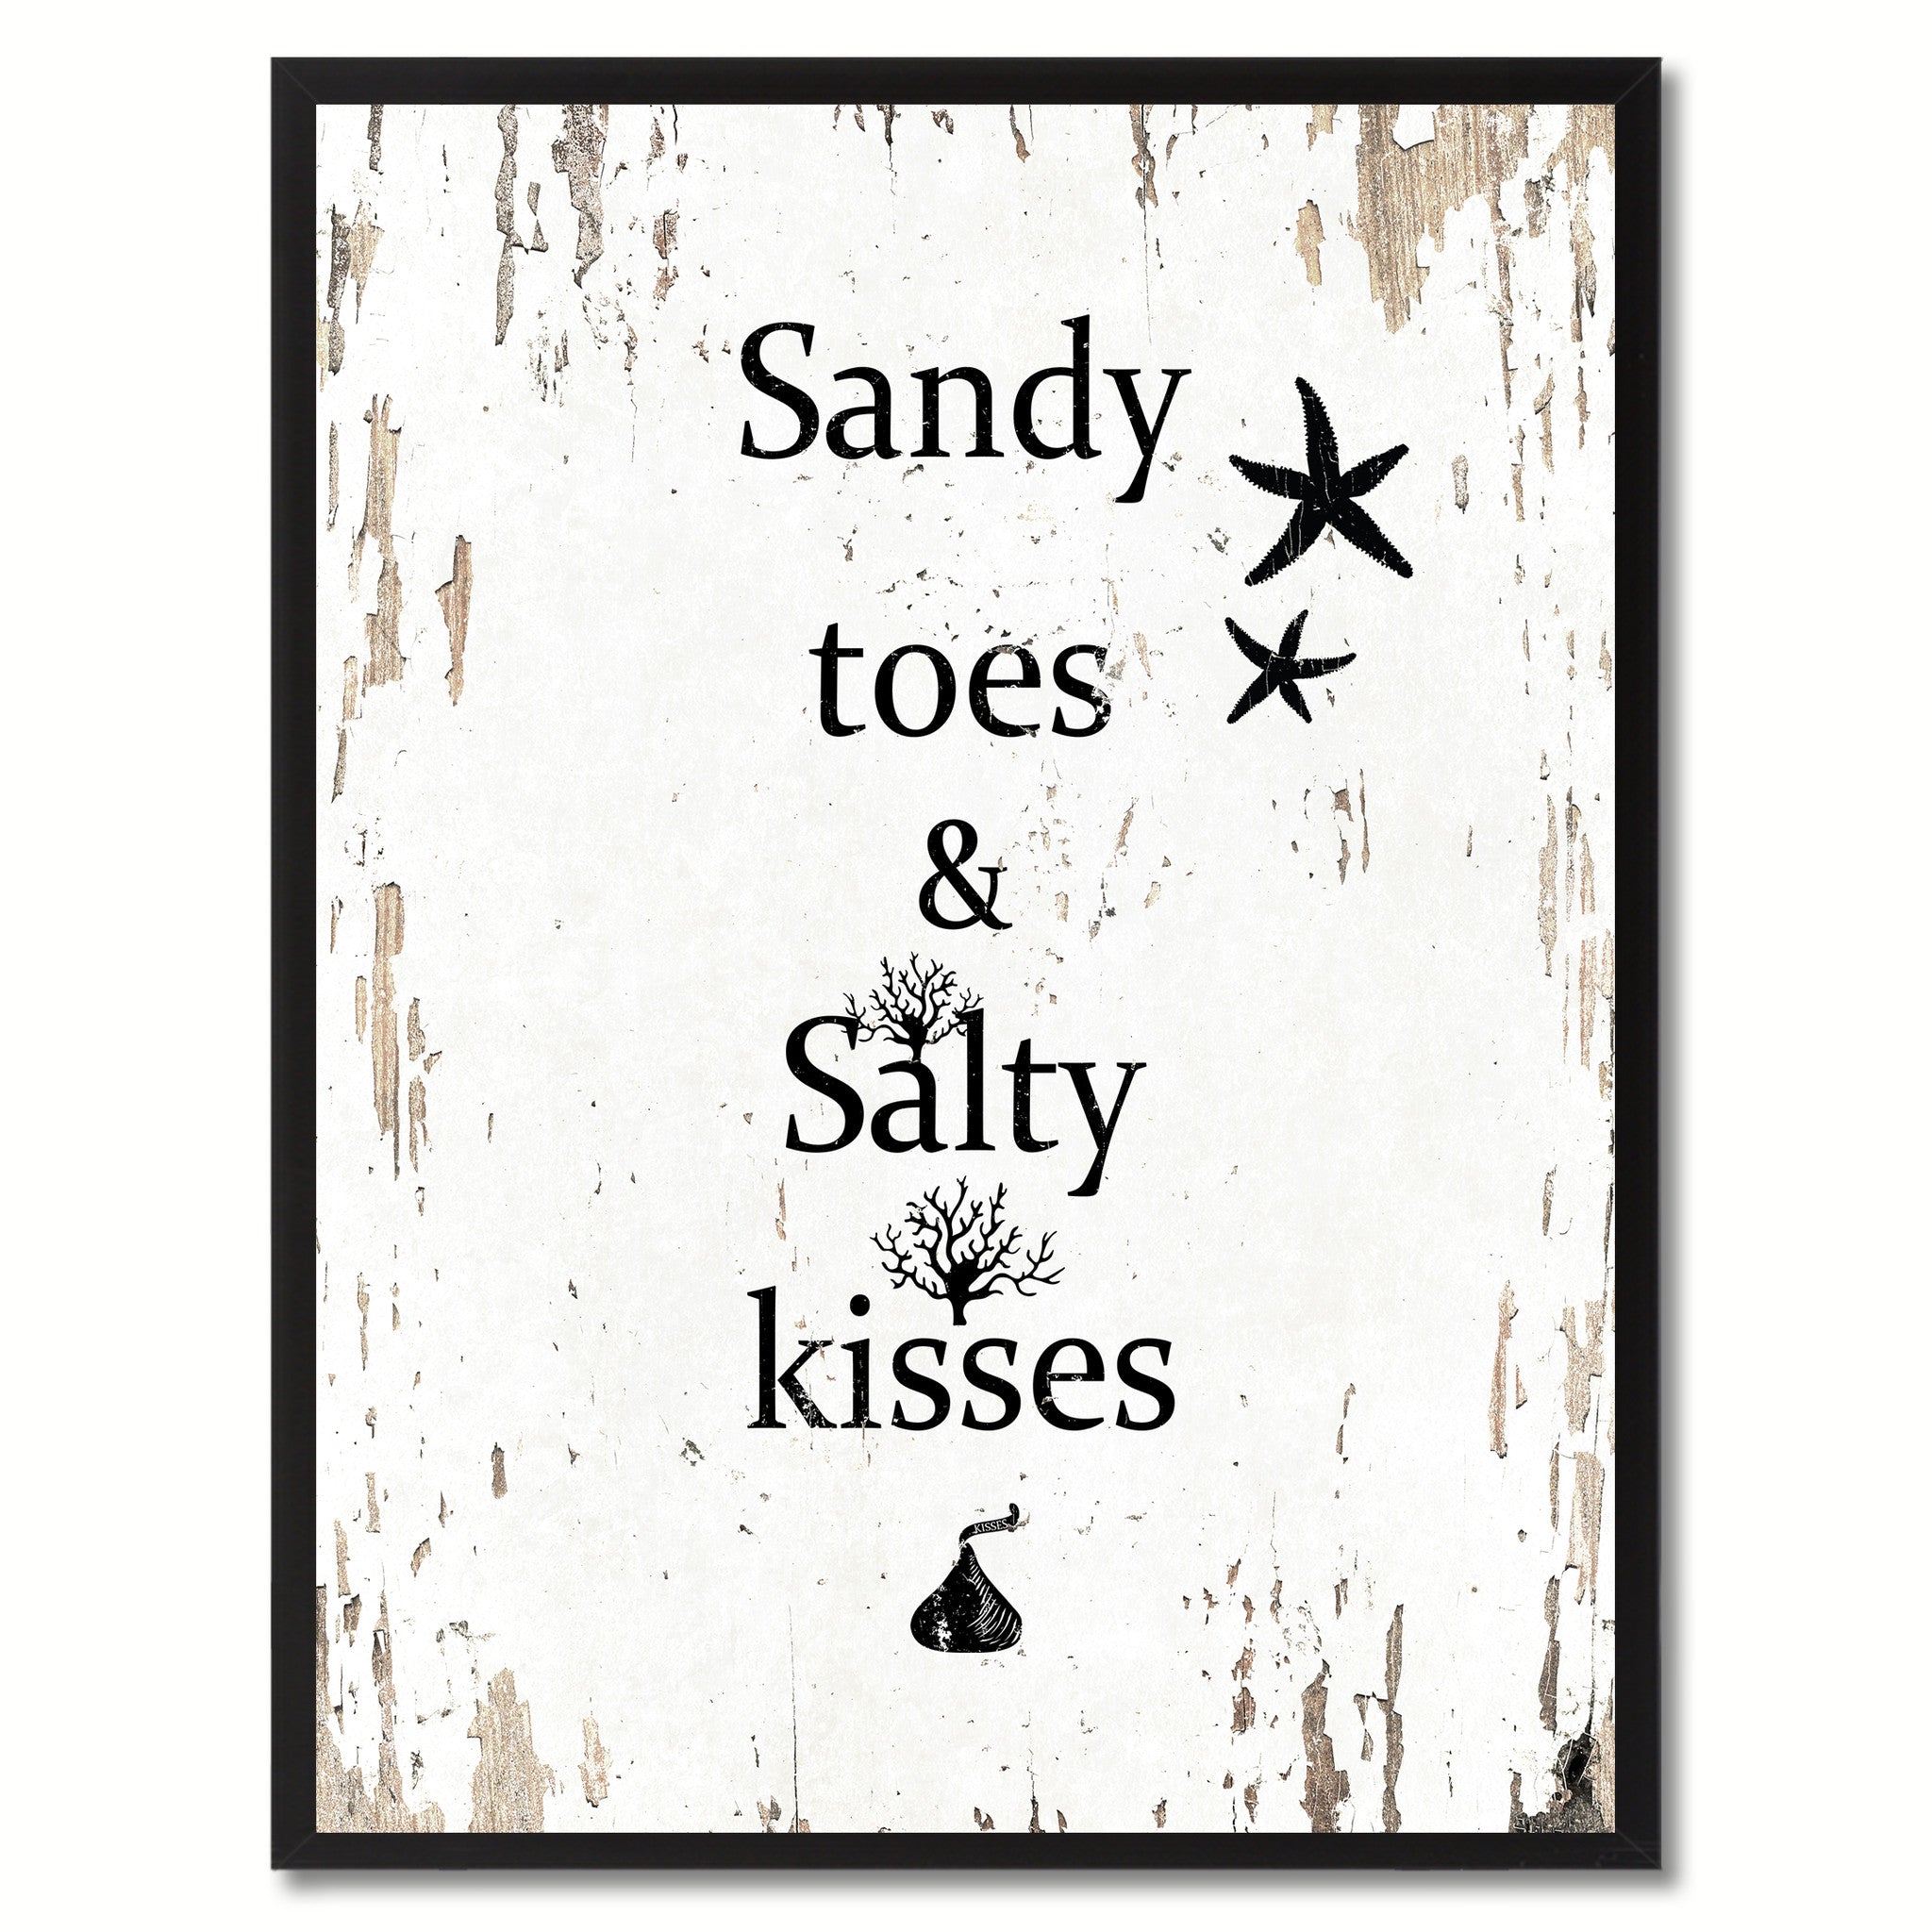 Sandy Toes & Salty Kisses Saying Canvas Print, Black Picture Frame Home Decor Wall Art Gifts